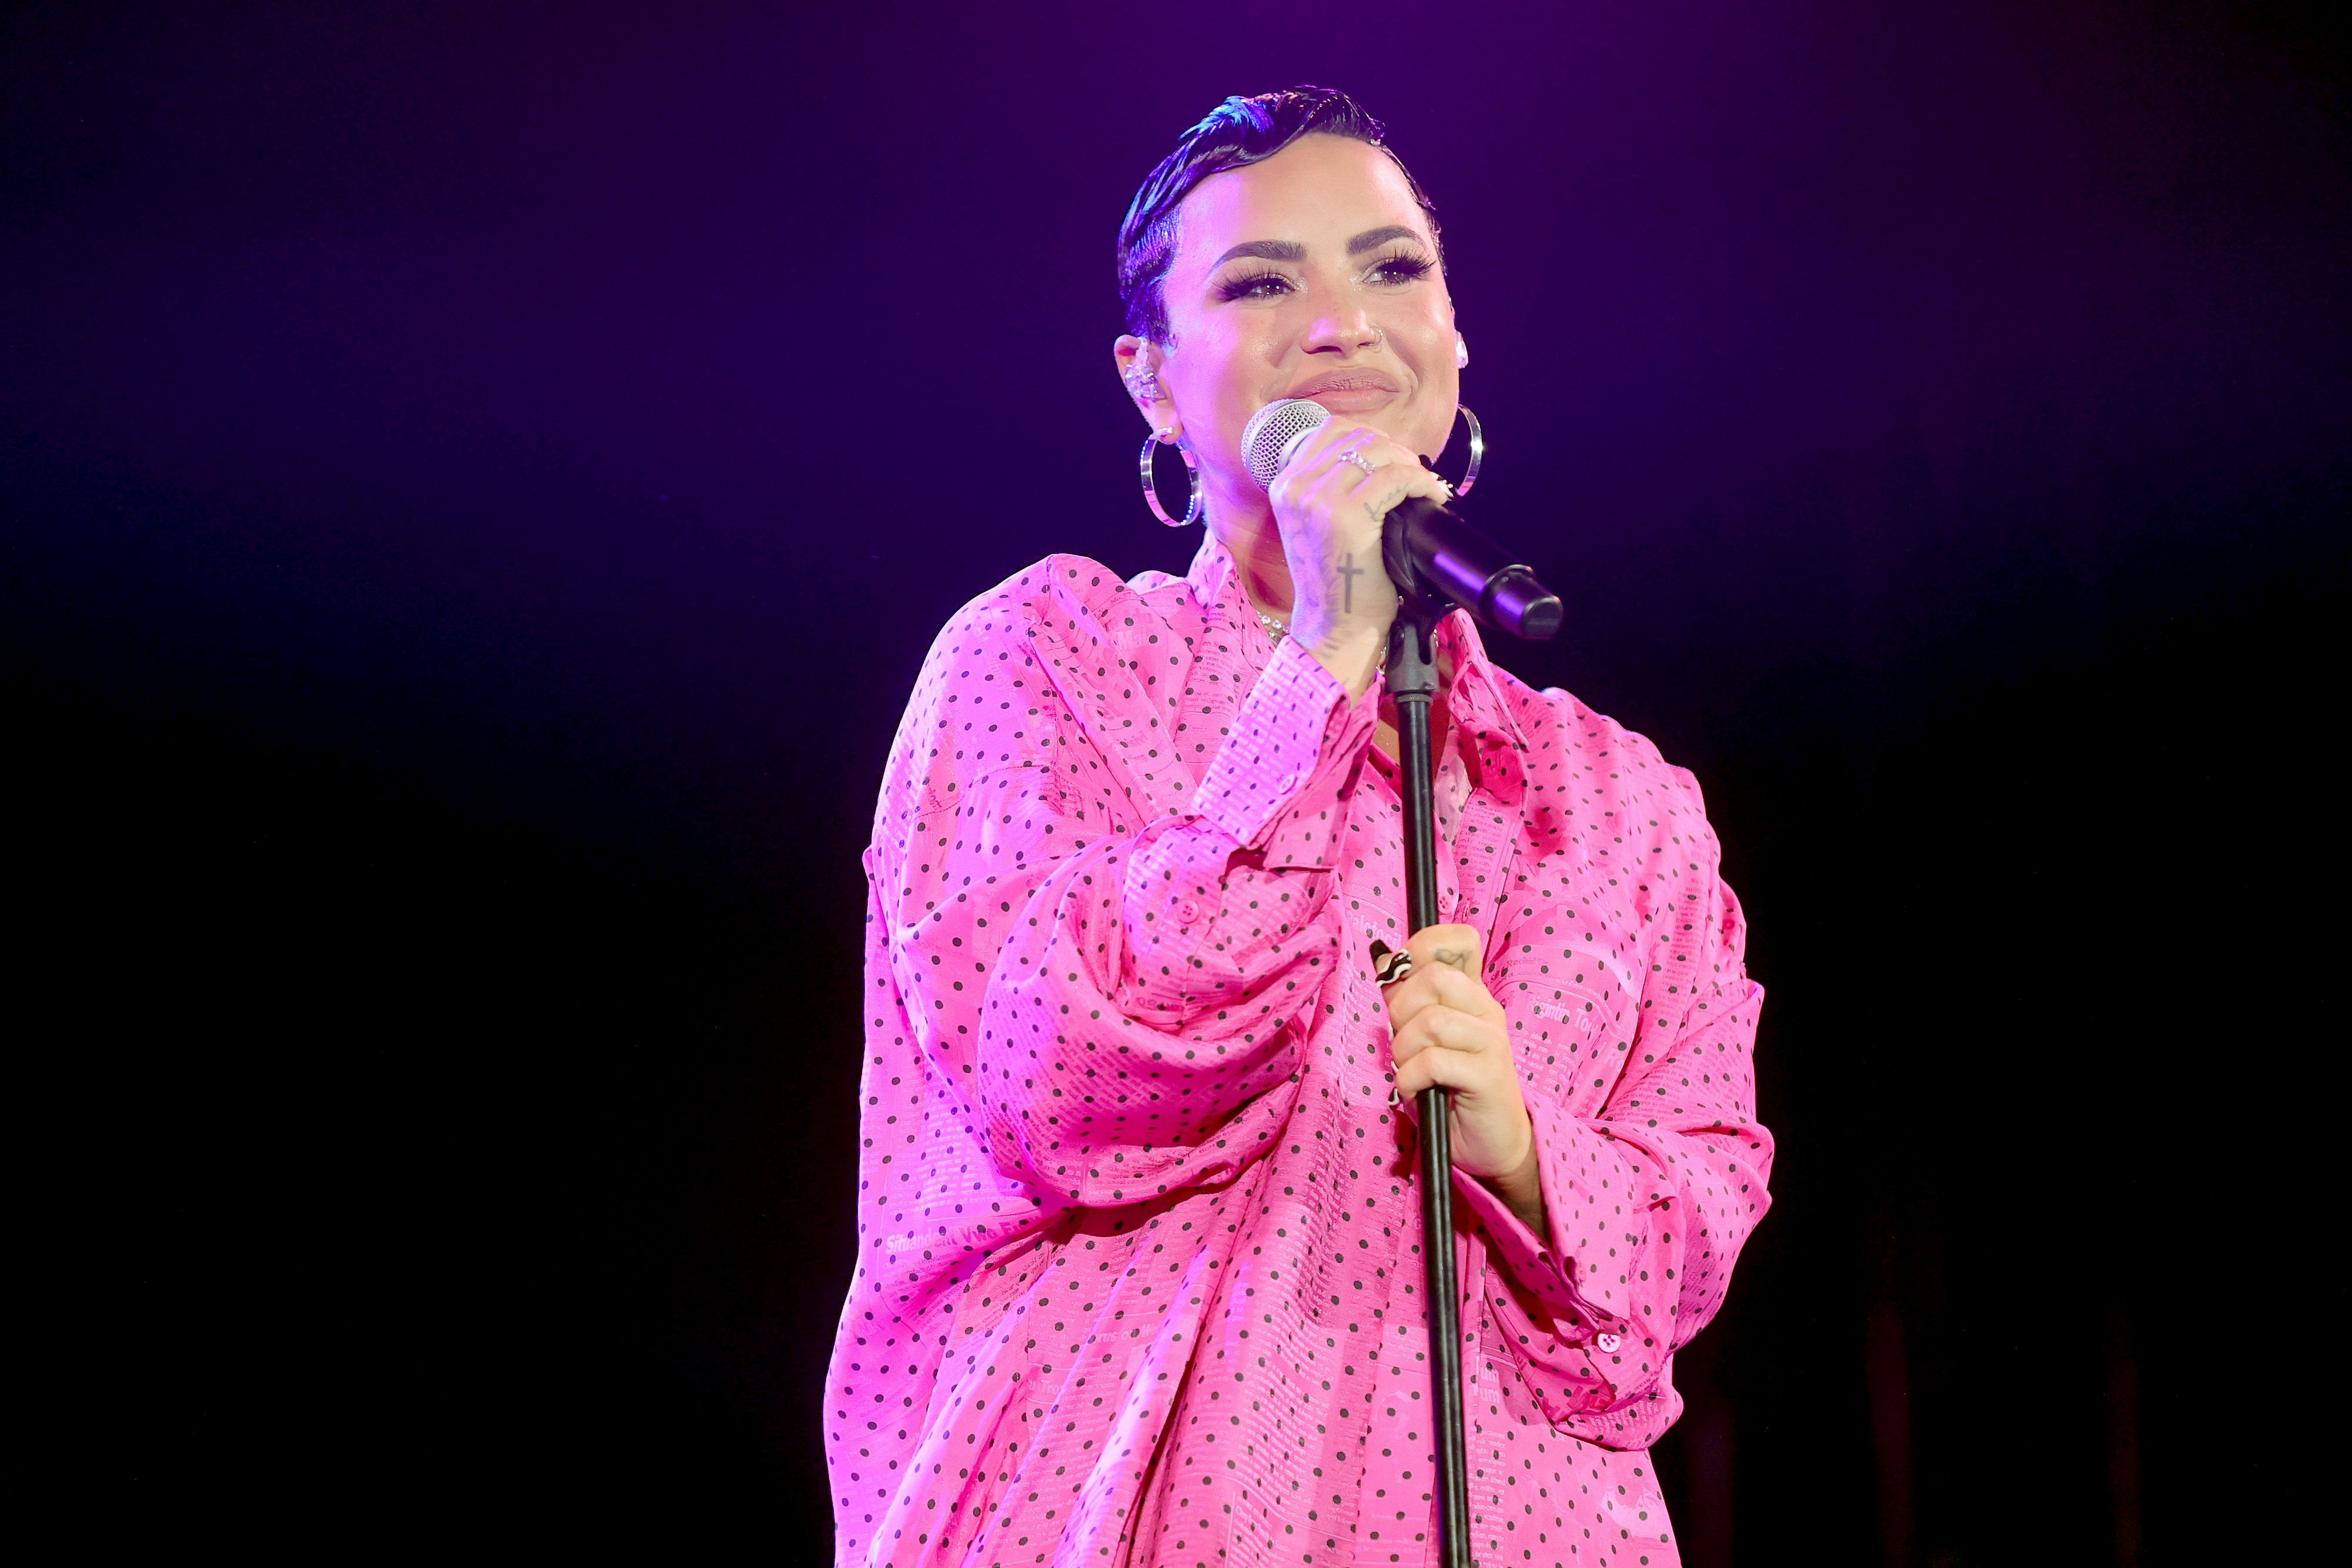 Demi Lovato performs during the premiere of "Demi Lovato: Dancing With The Devil" in Beverly Hills, Calif., on March 22, 2021. (Rich Fury—Getty Images for OBB Media)